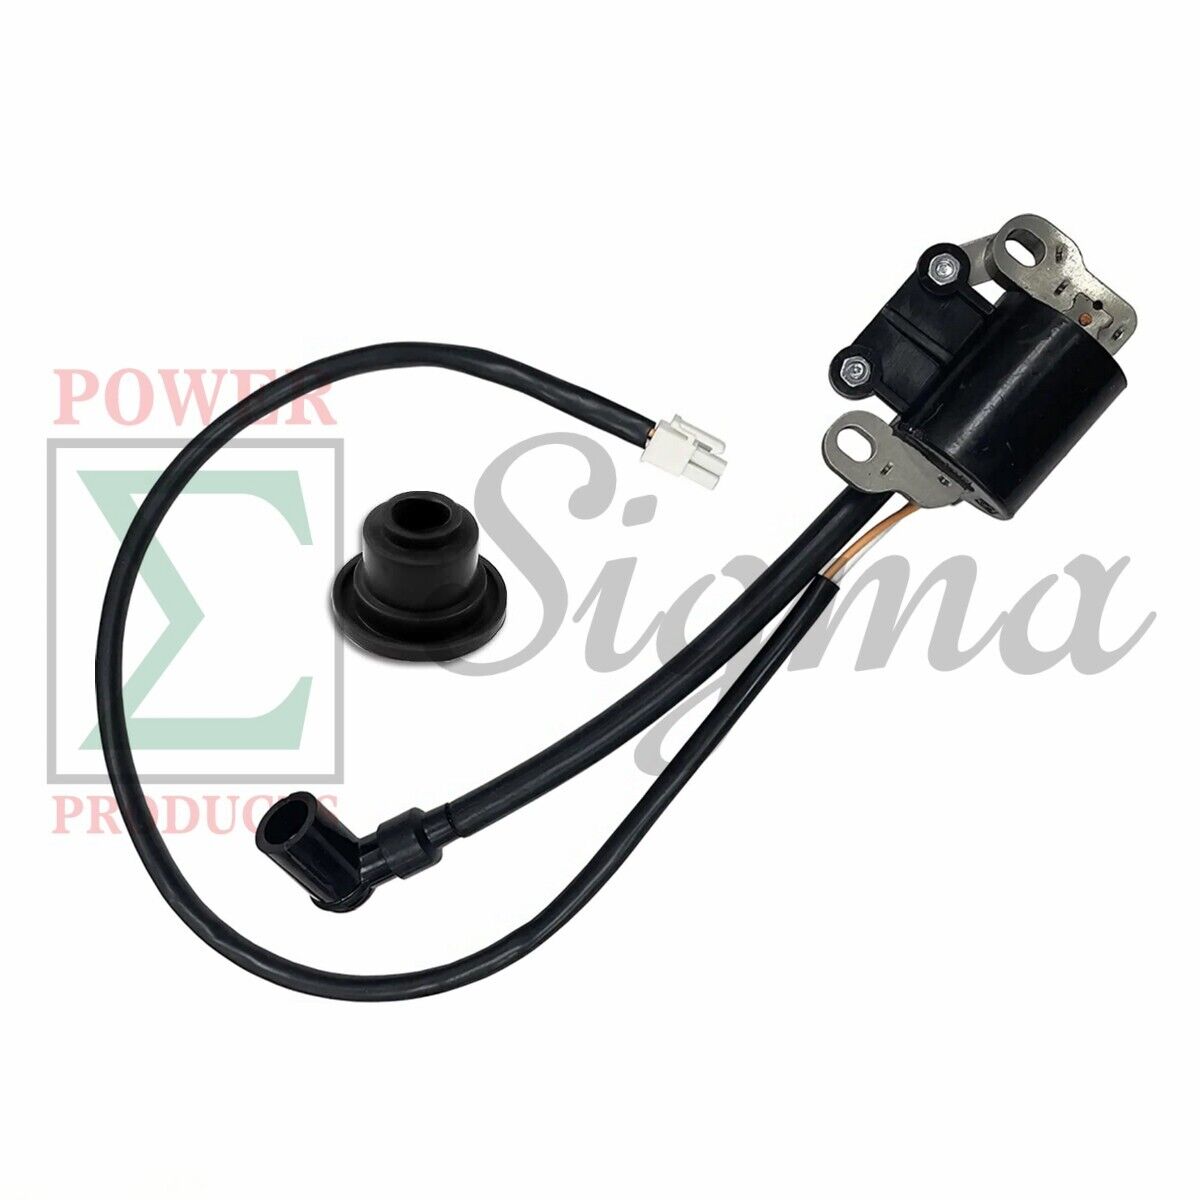 2-Wire Ignition Coil For Predator 3500 Watt Inverter Generator WithOUT CO Secure